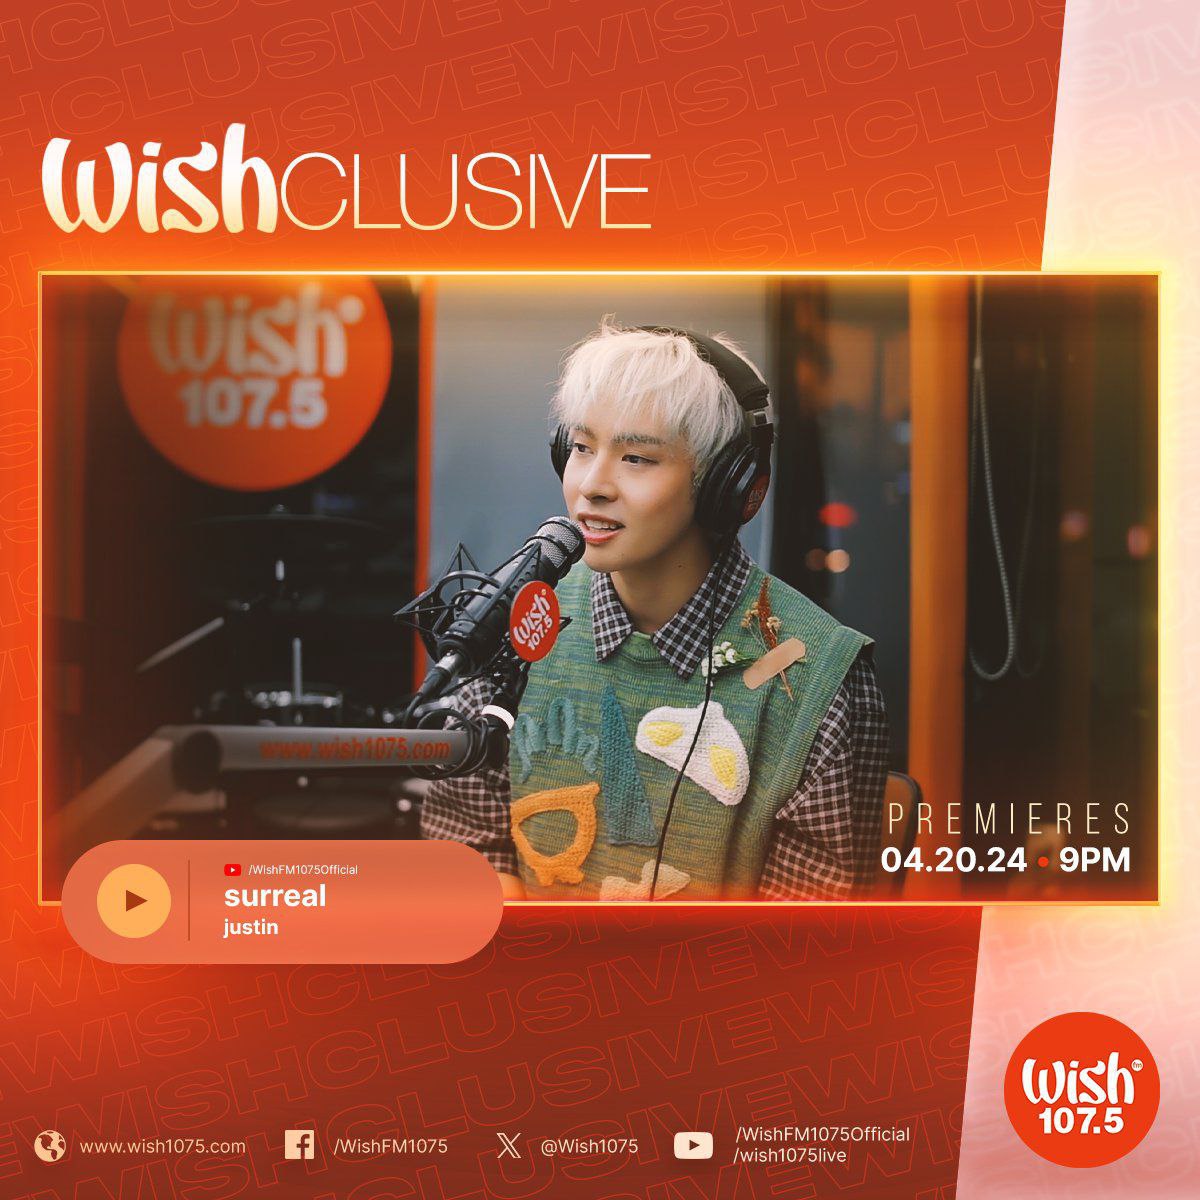 [ TAG UPDATE ] Let's all swing each other's hands in rhythm as we watch Justin's Wishclusive performance to his debut single 'surreal'! 🌱 Catch it tonight at 9 PM on @wish1075's YT channel! UPDATED TAGS: JustinSurreal WishPerformance @justintdedios #justin #SURREALonWishBus